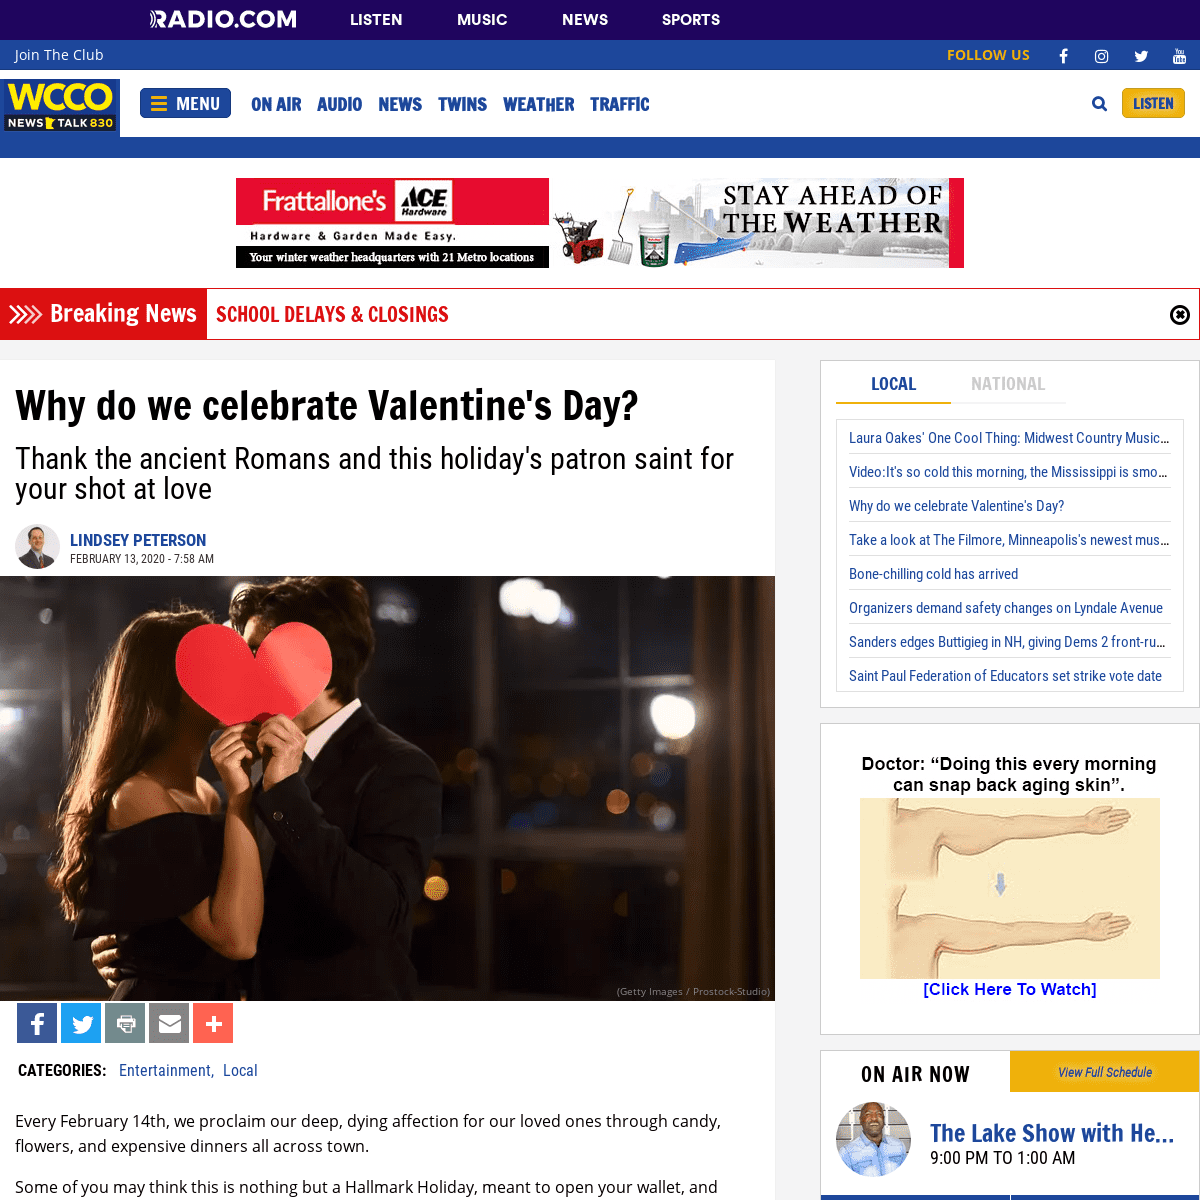 A complete backup of wccoradio.radio.com/articles/feature-article/why-do-we-celebrate-valentines-day